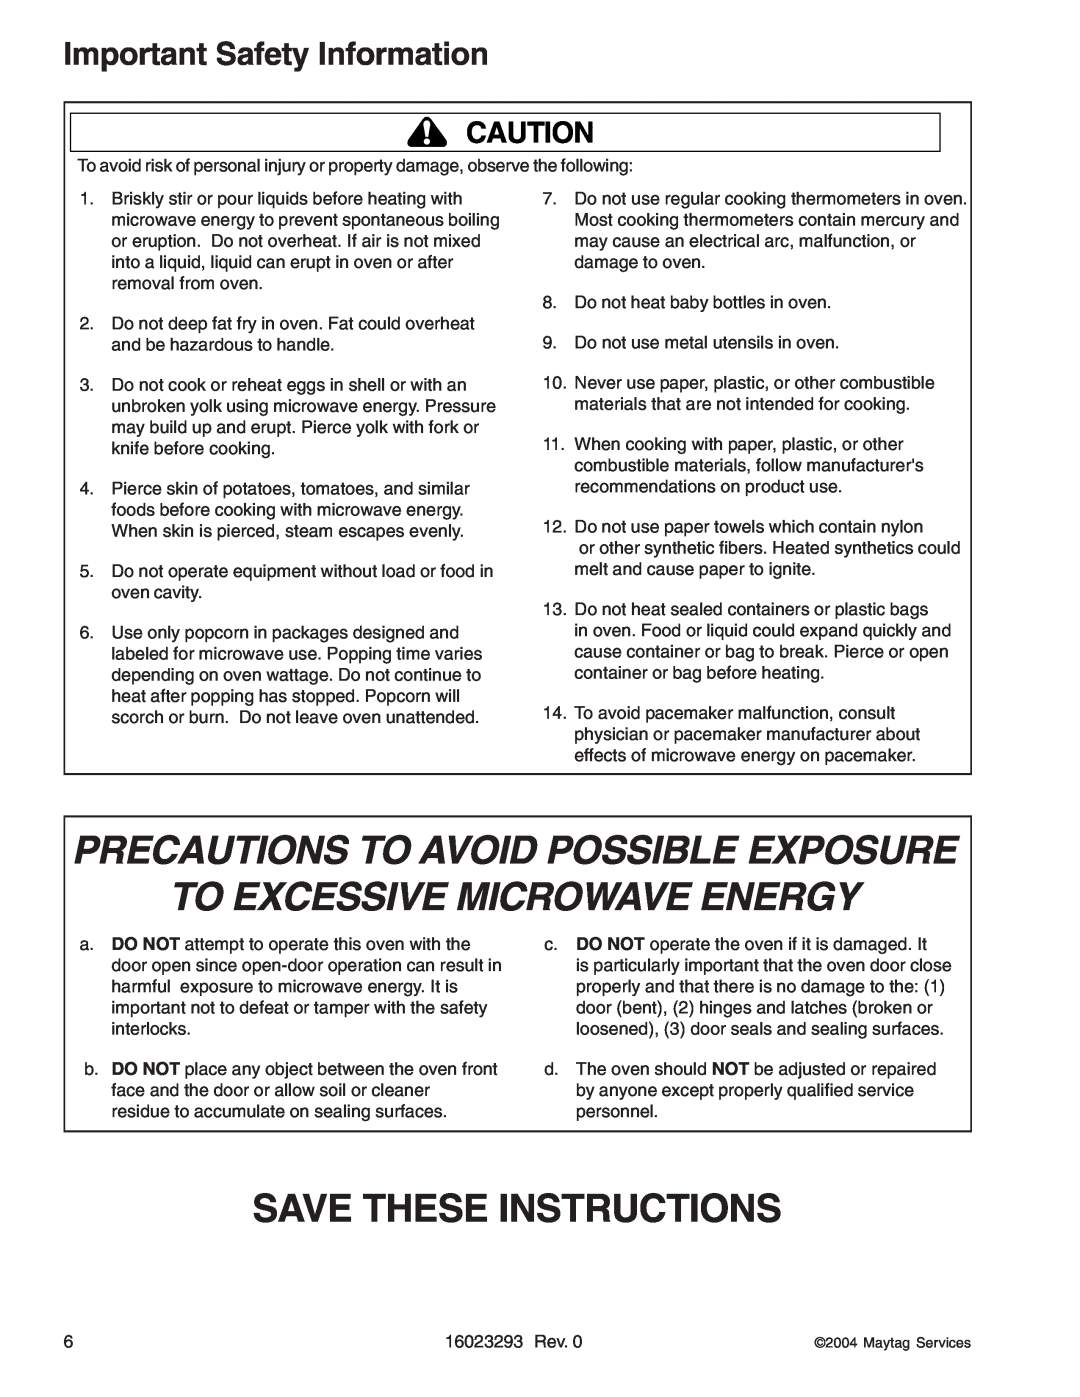 Maytag RCS10DA, RFS manual Precautions To Avoid Possible Exposure To Excessive Microwave Energy, Save These Instructions 